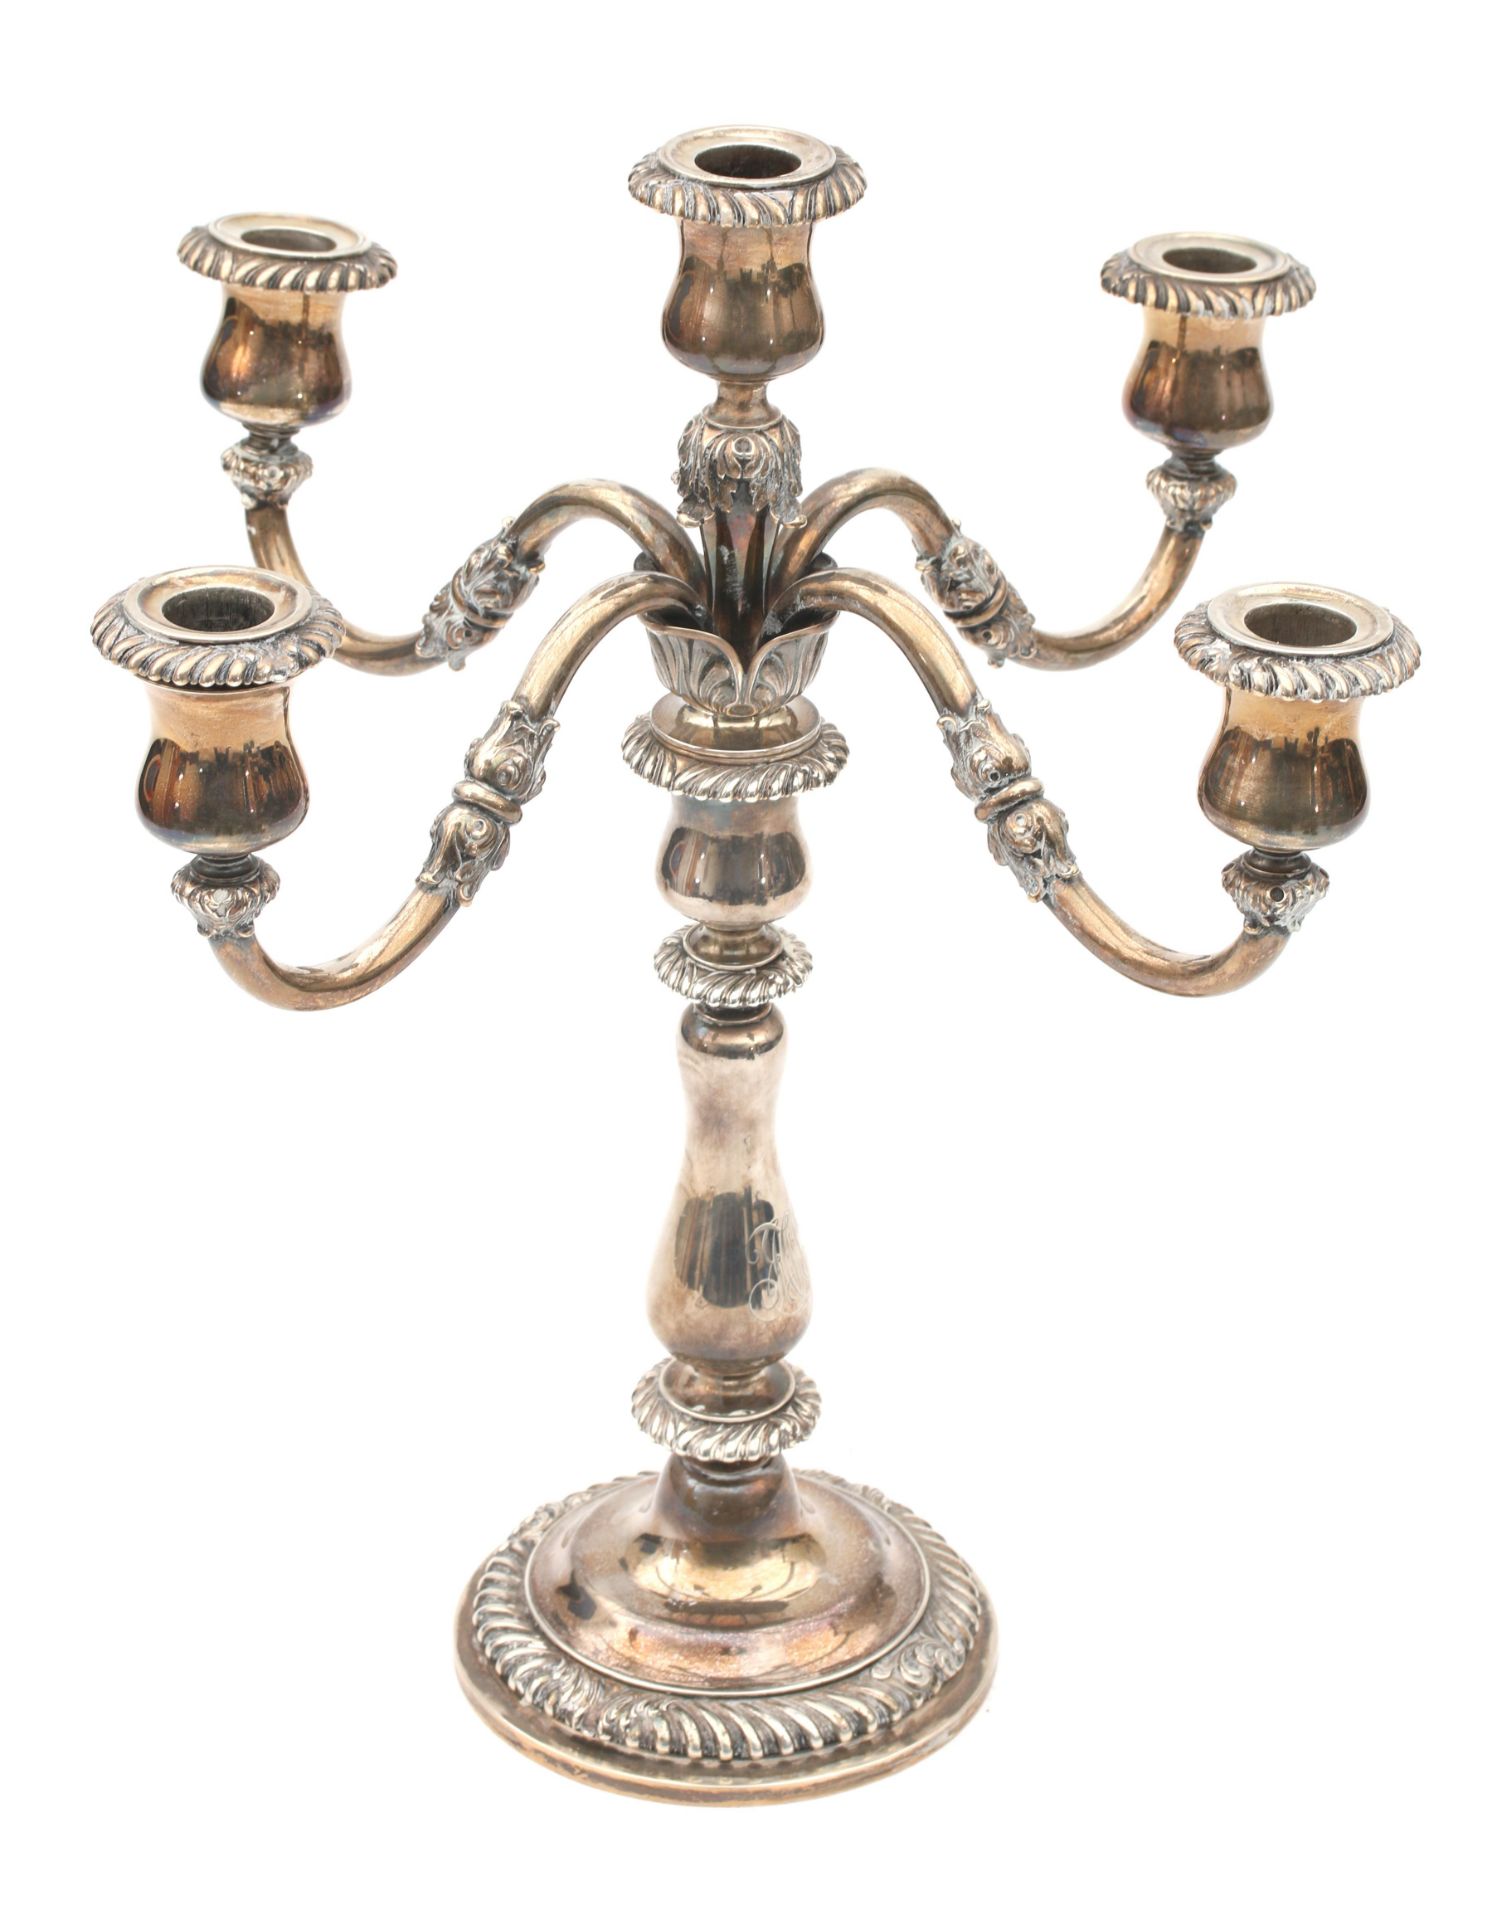 A five arm sterling silver candelabra, England, early 20th century.